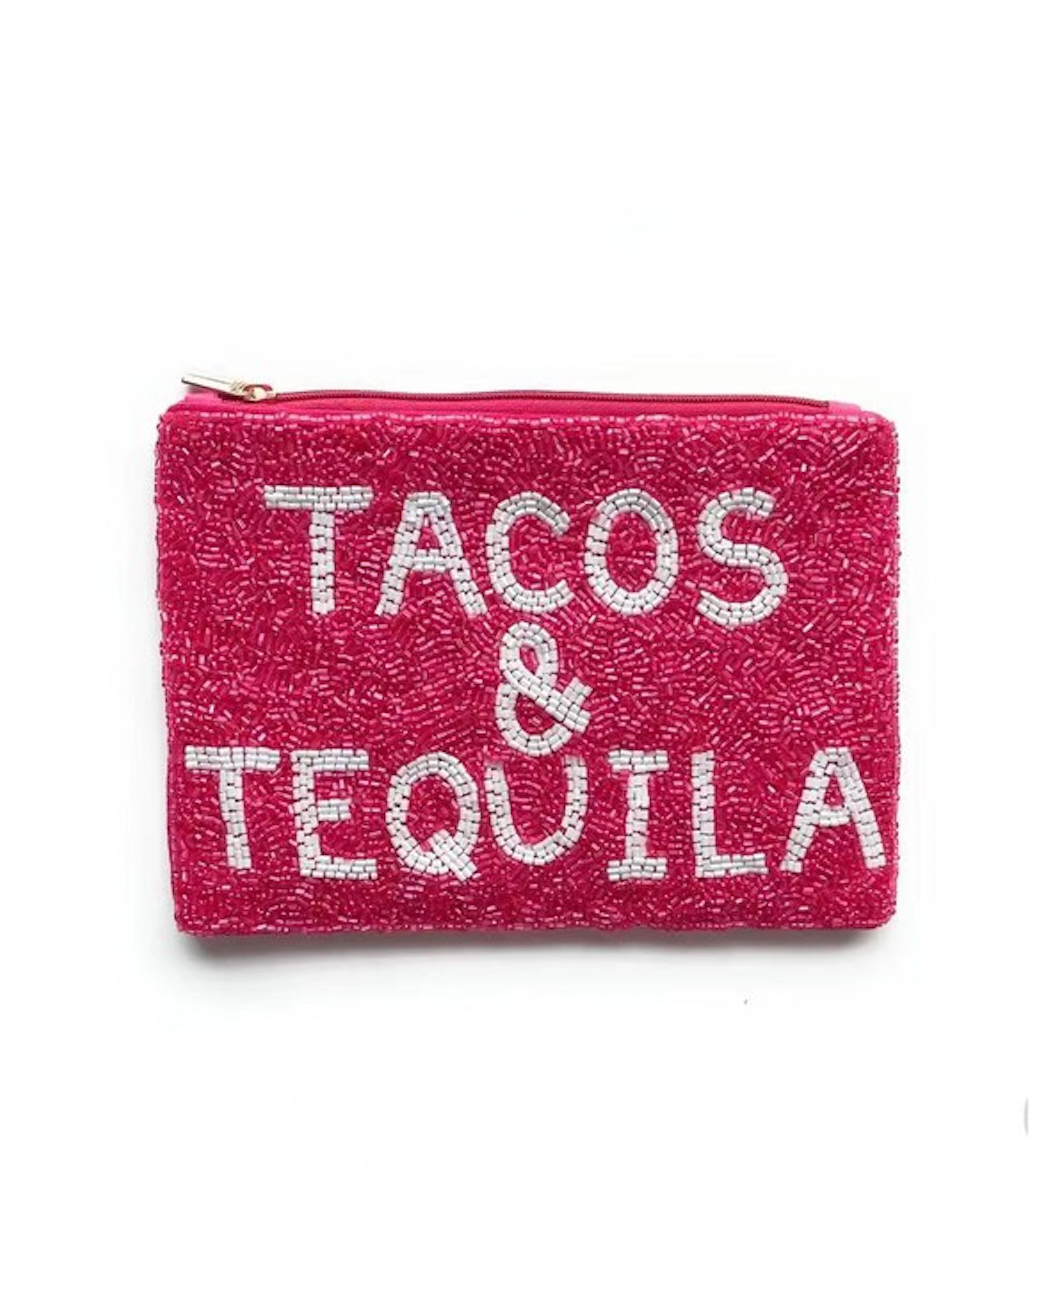 TACOS&TEQUILA Beaded Coin Purse